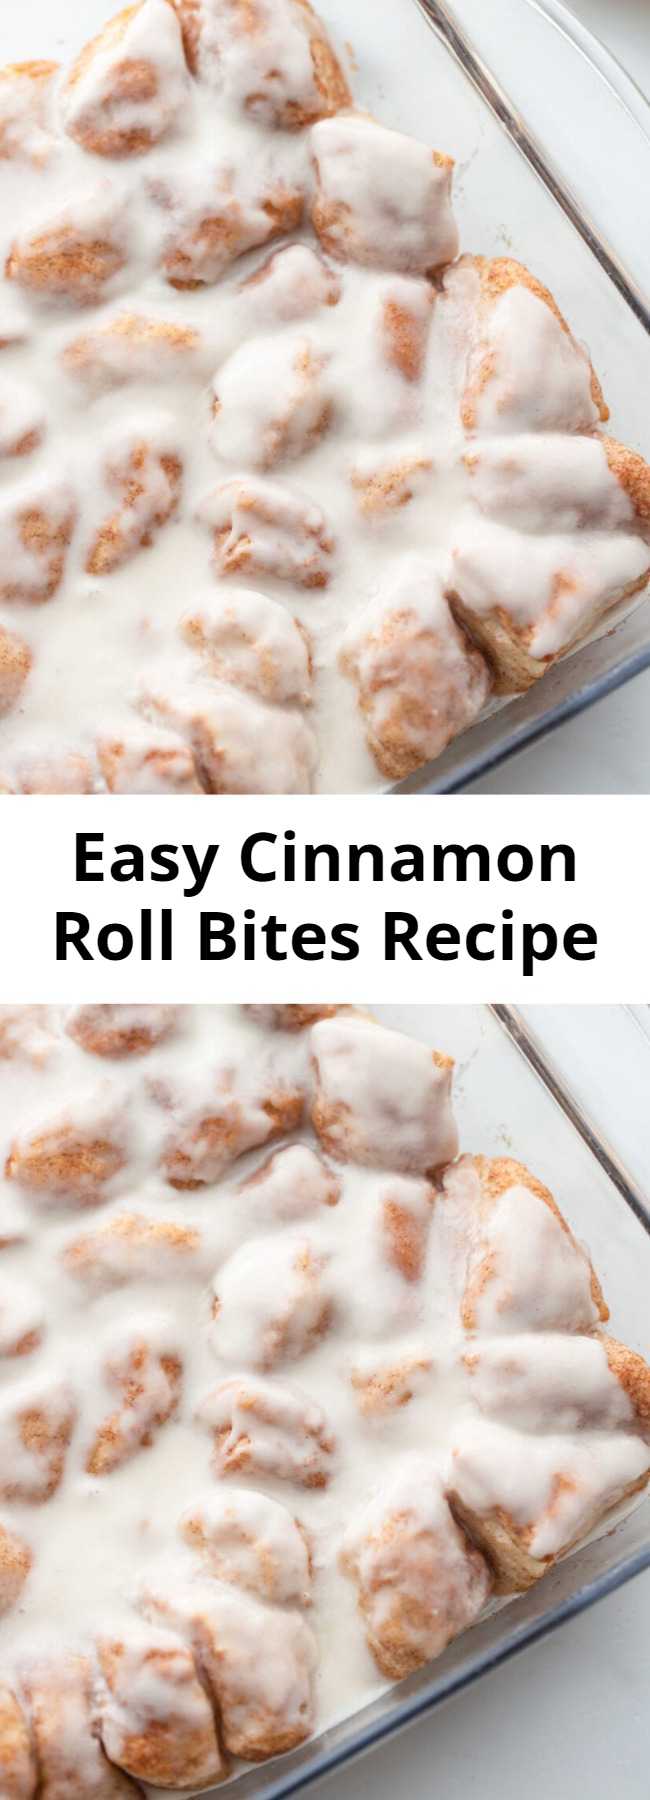 Easy Cinnamon Roll Bites Recipe - Ooey, gooey Cinnamon Roll Bites give you all the great taste of a cinnamon roll without all the work! They take no time at all to make and will vanish quicker than a blink of an eye.